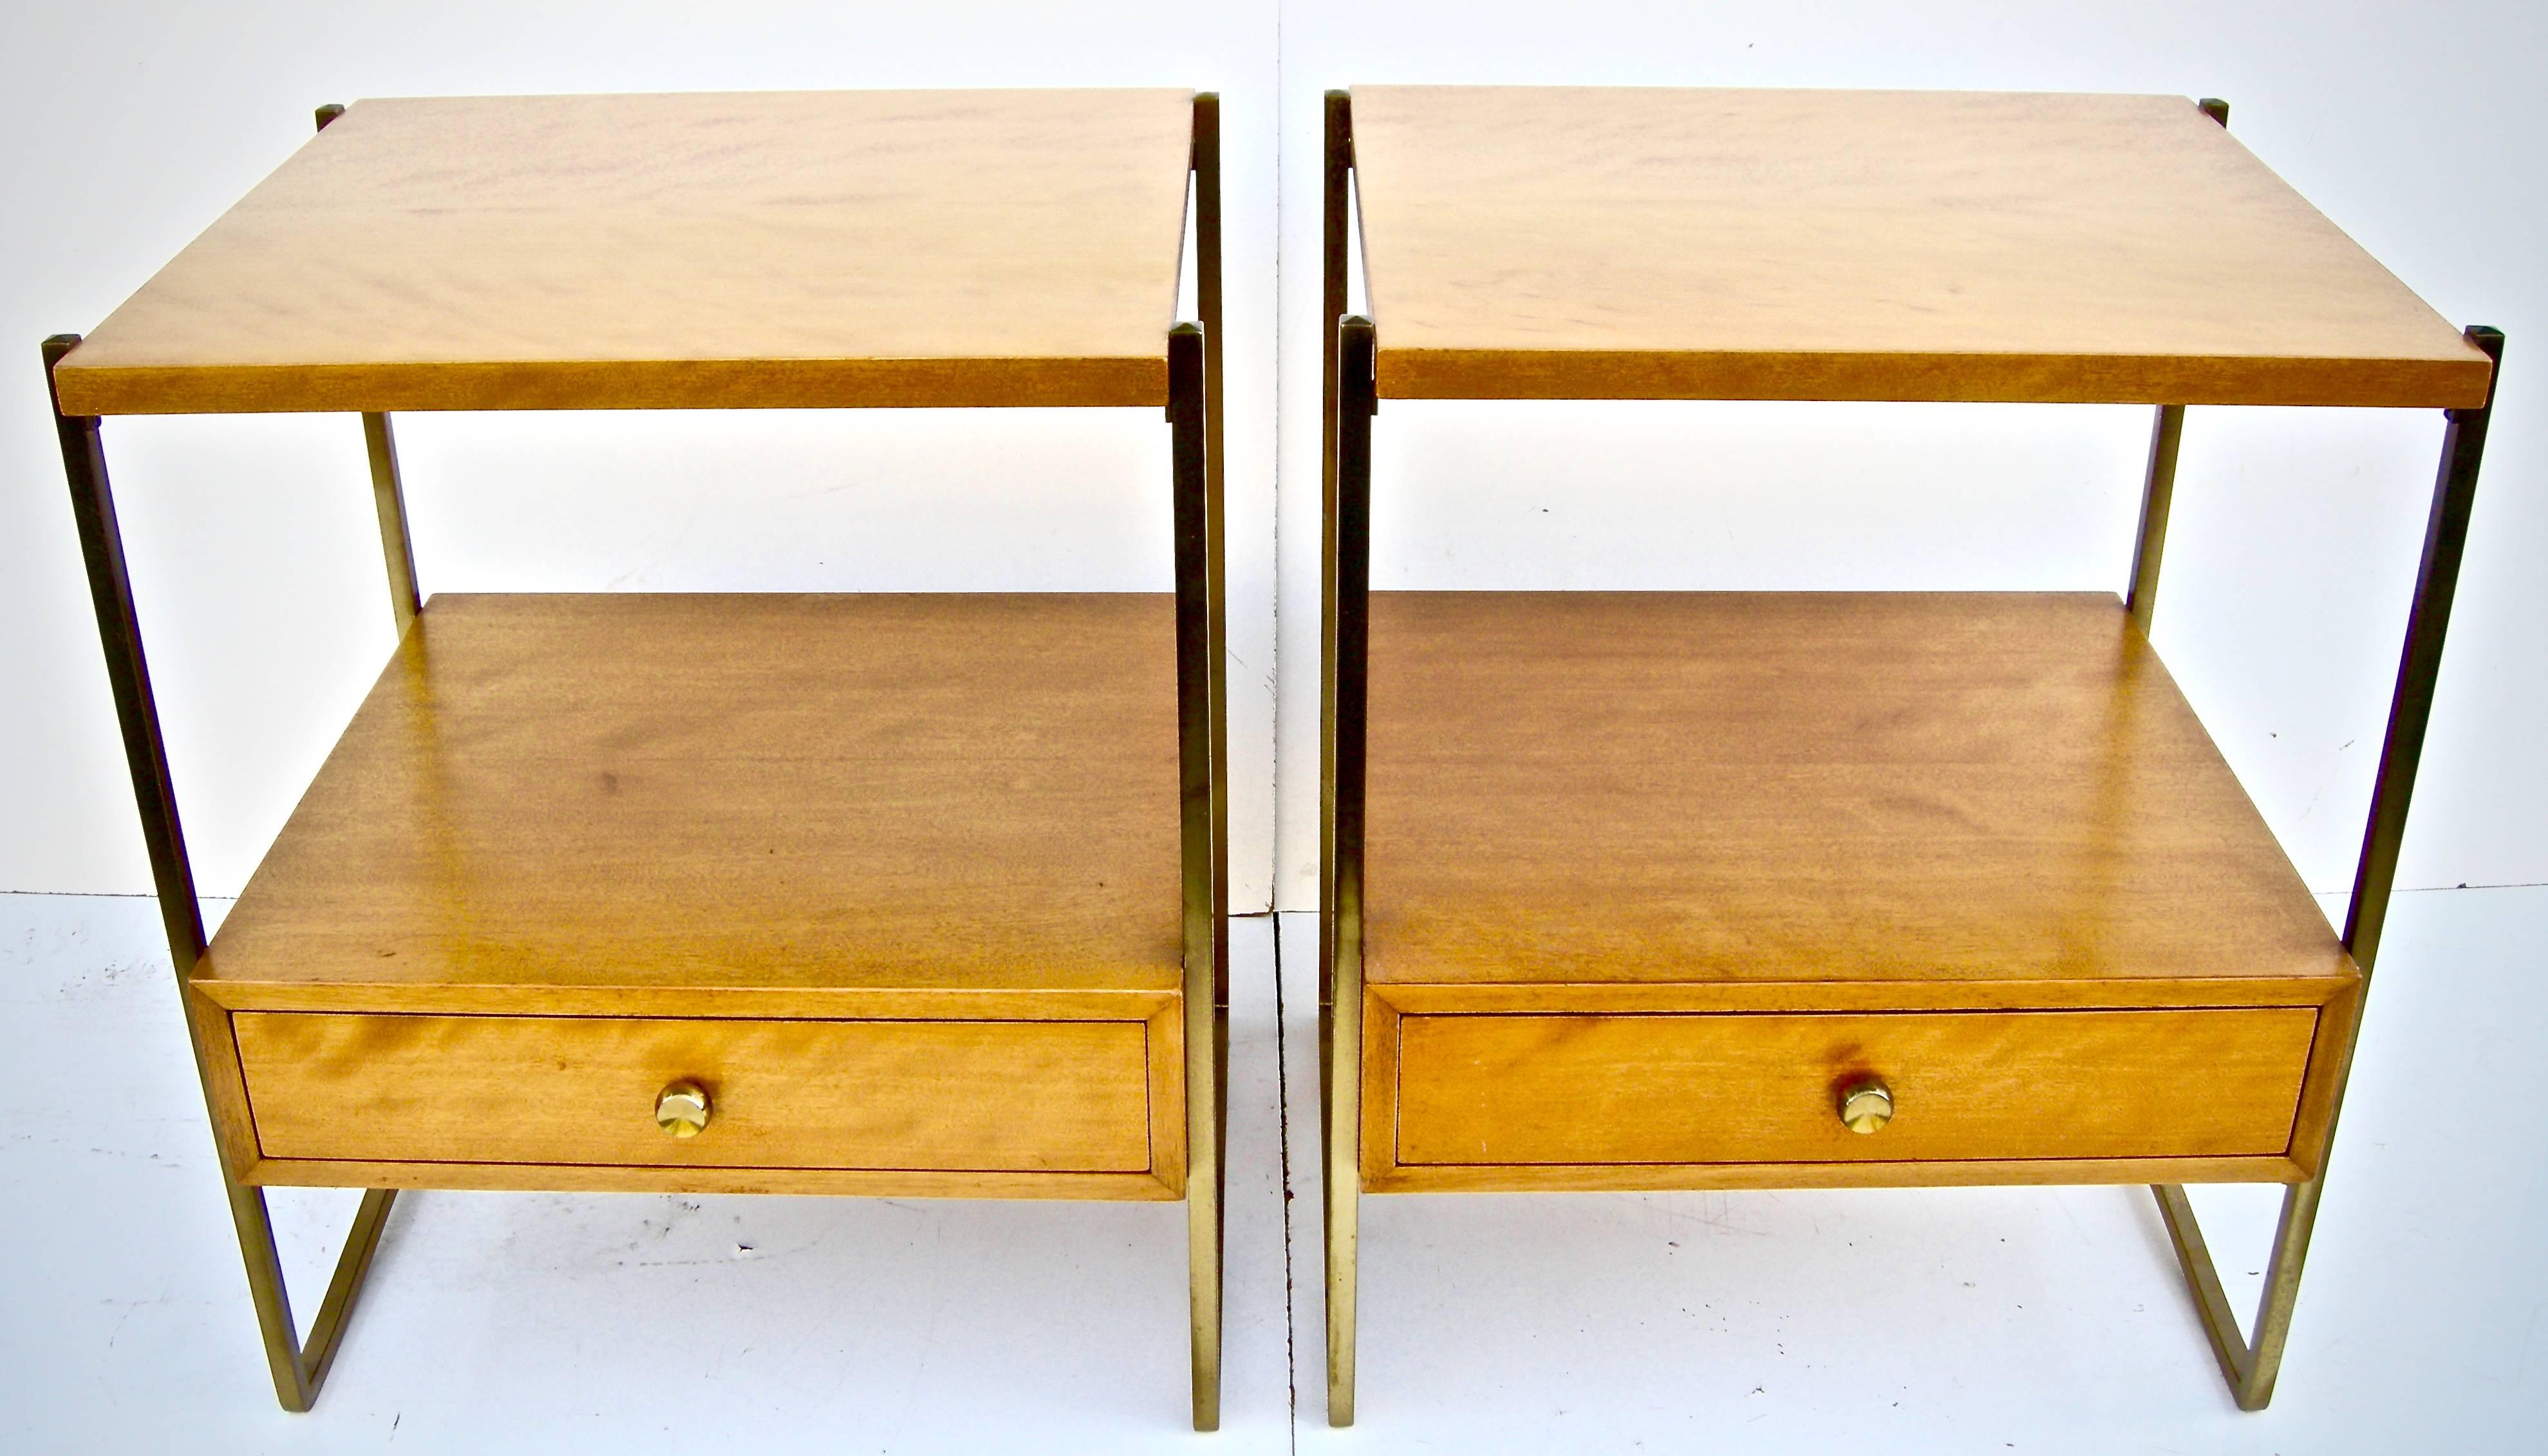 Striking pair of vintage and seldom seen, modernist-style chests by the iconic, Kittinger Furniture Company. Beautiful, light wood, flame-grained veneer finishes with bronze-like, brass supports. Stylish curved-raised stretchers add pleasing